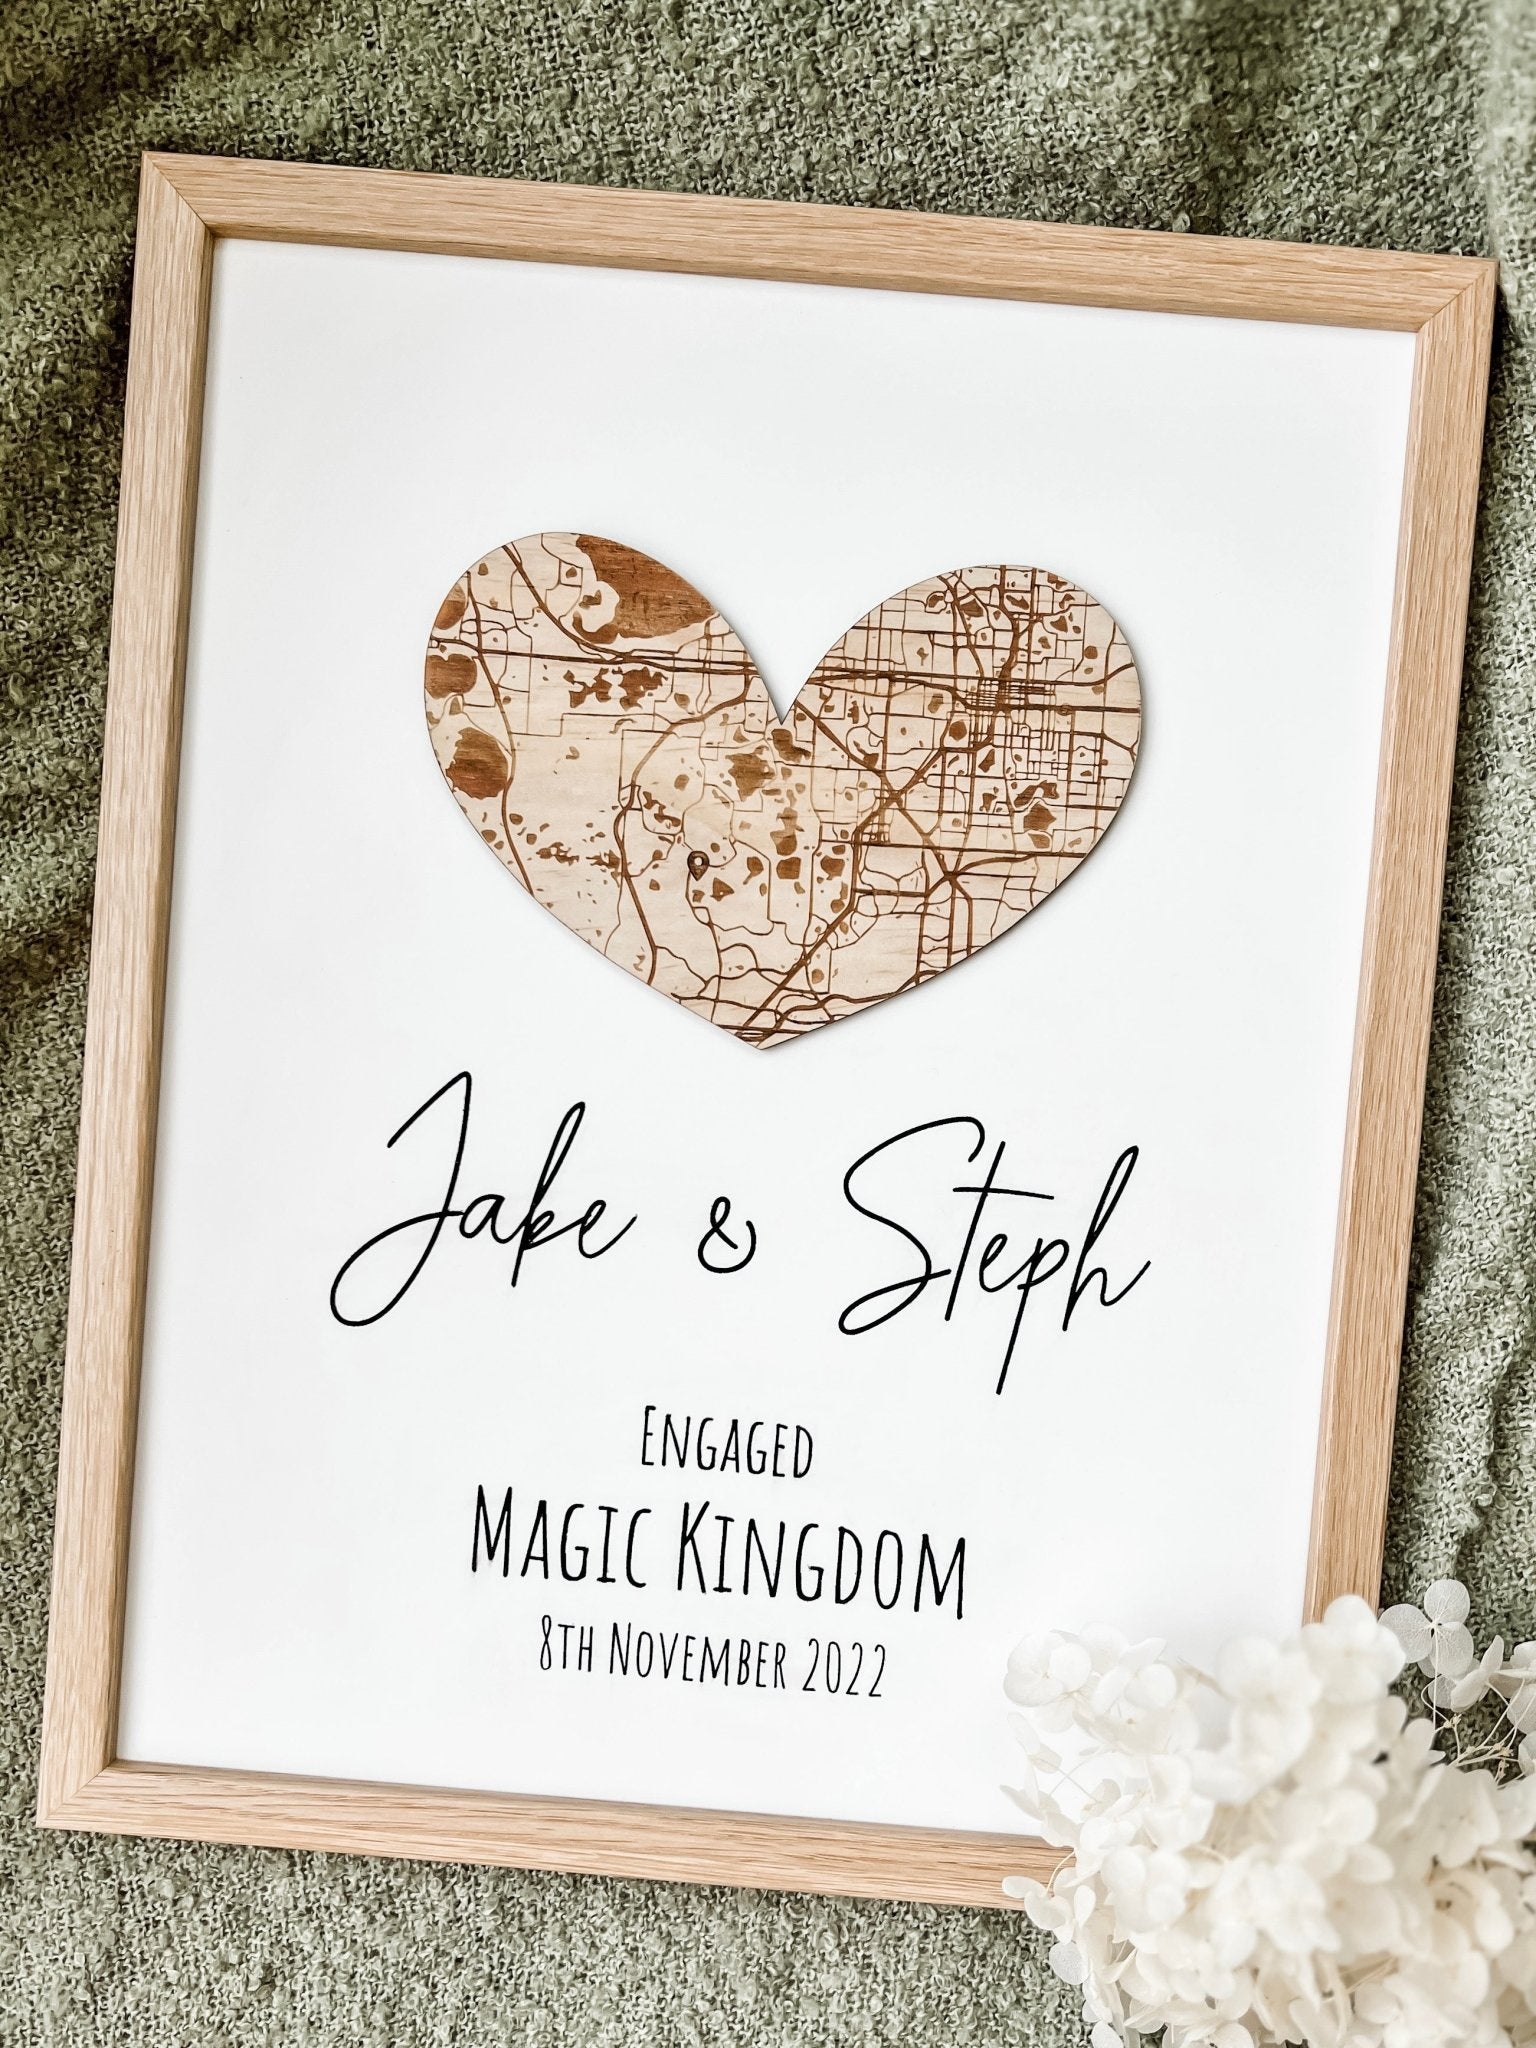 Framed Love Map - The Humble Gift Co.